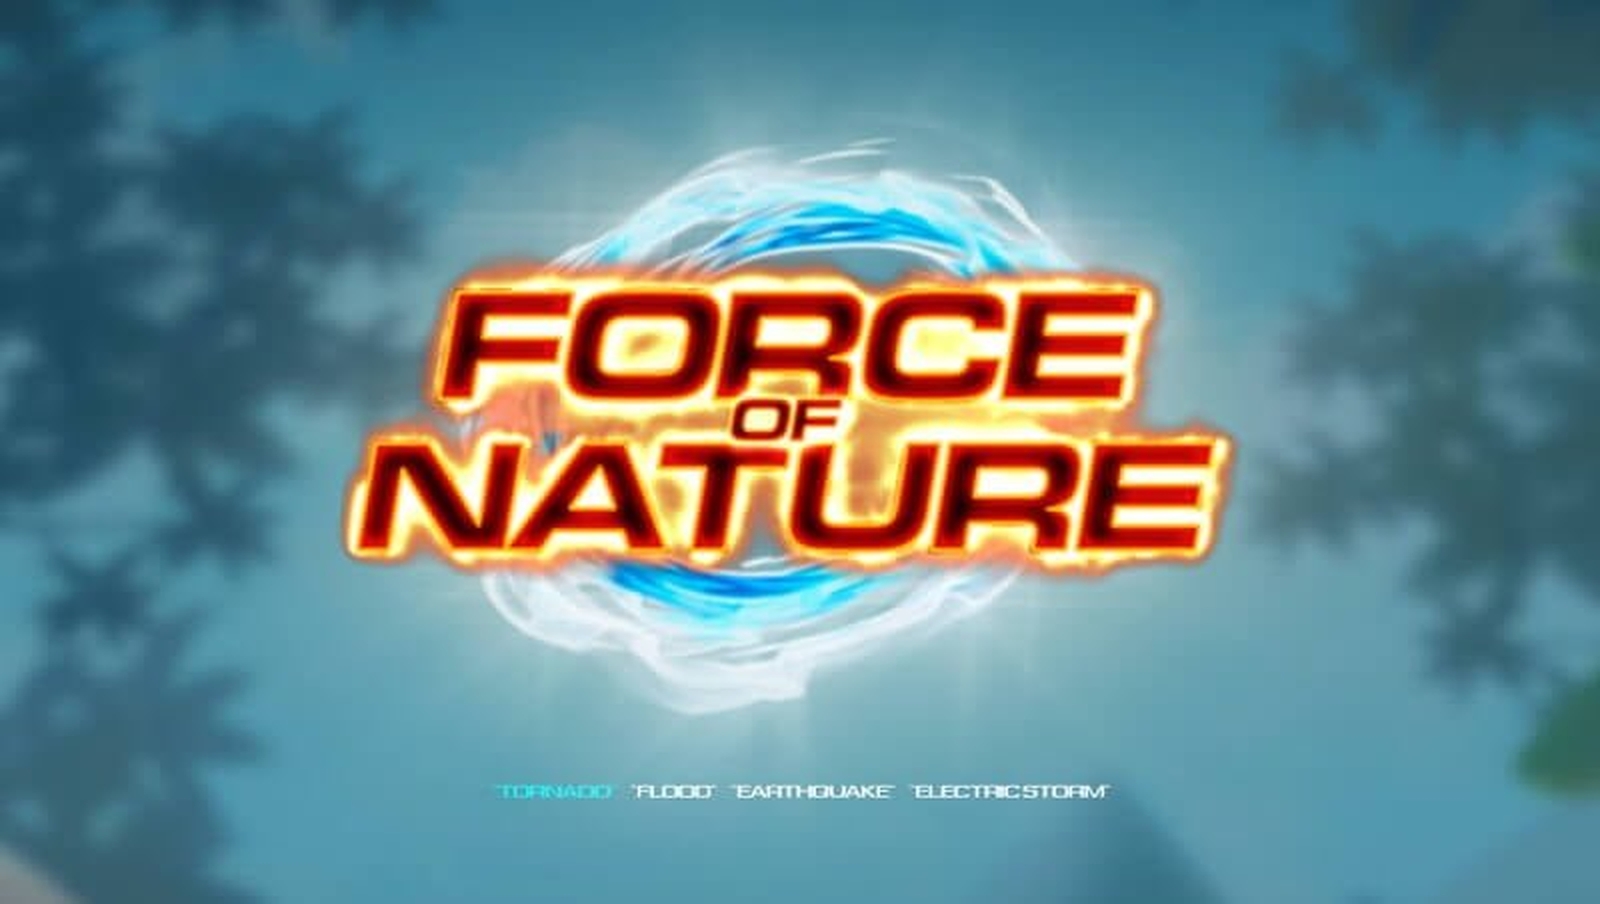 The Force of Nature Online Slot Demo Game by Leander Games